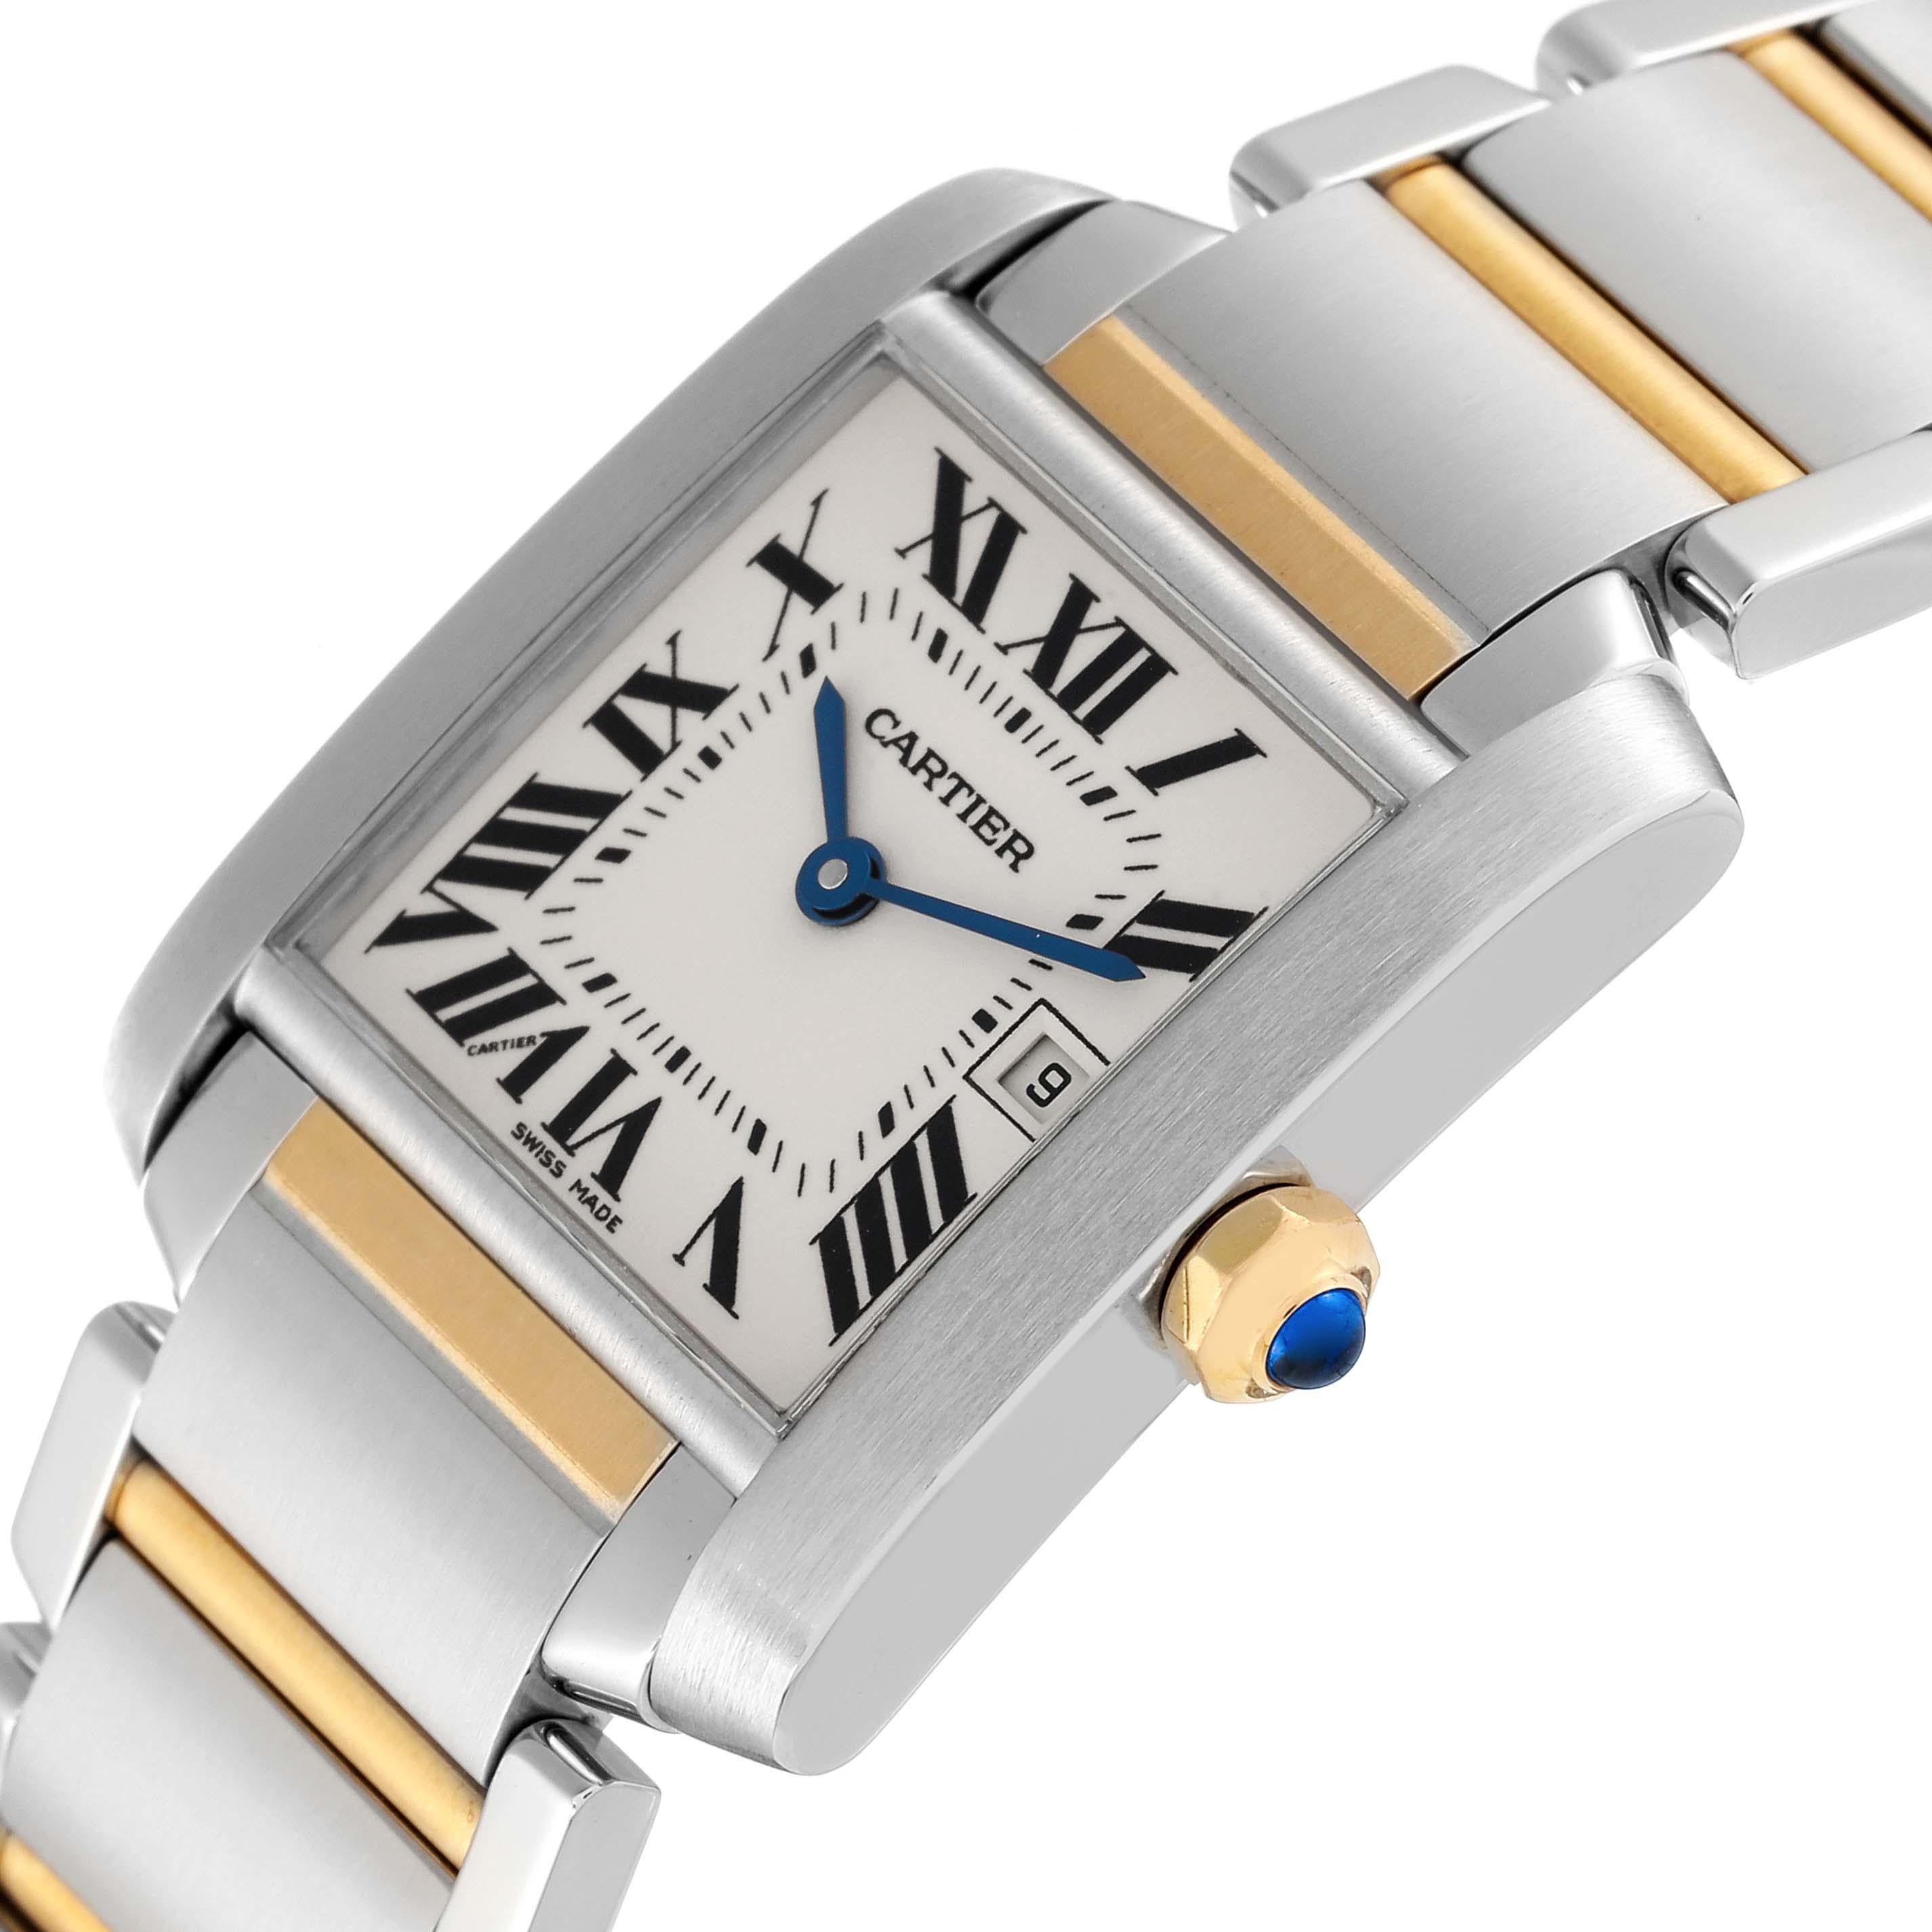 Cartier Tank Francaise Midsize Steel Yellow Gold Ladies Watch W51012Q4 Papers 1